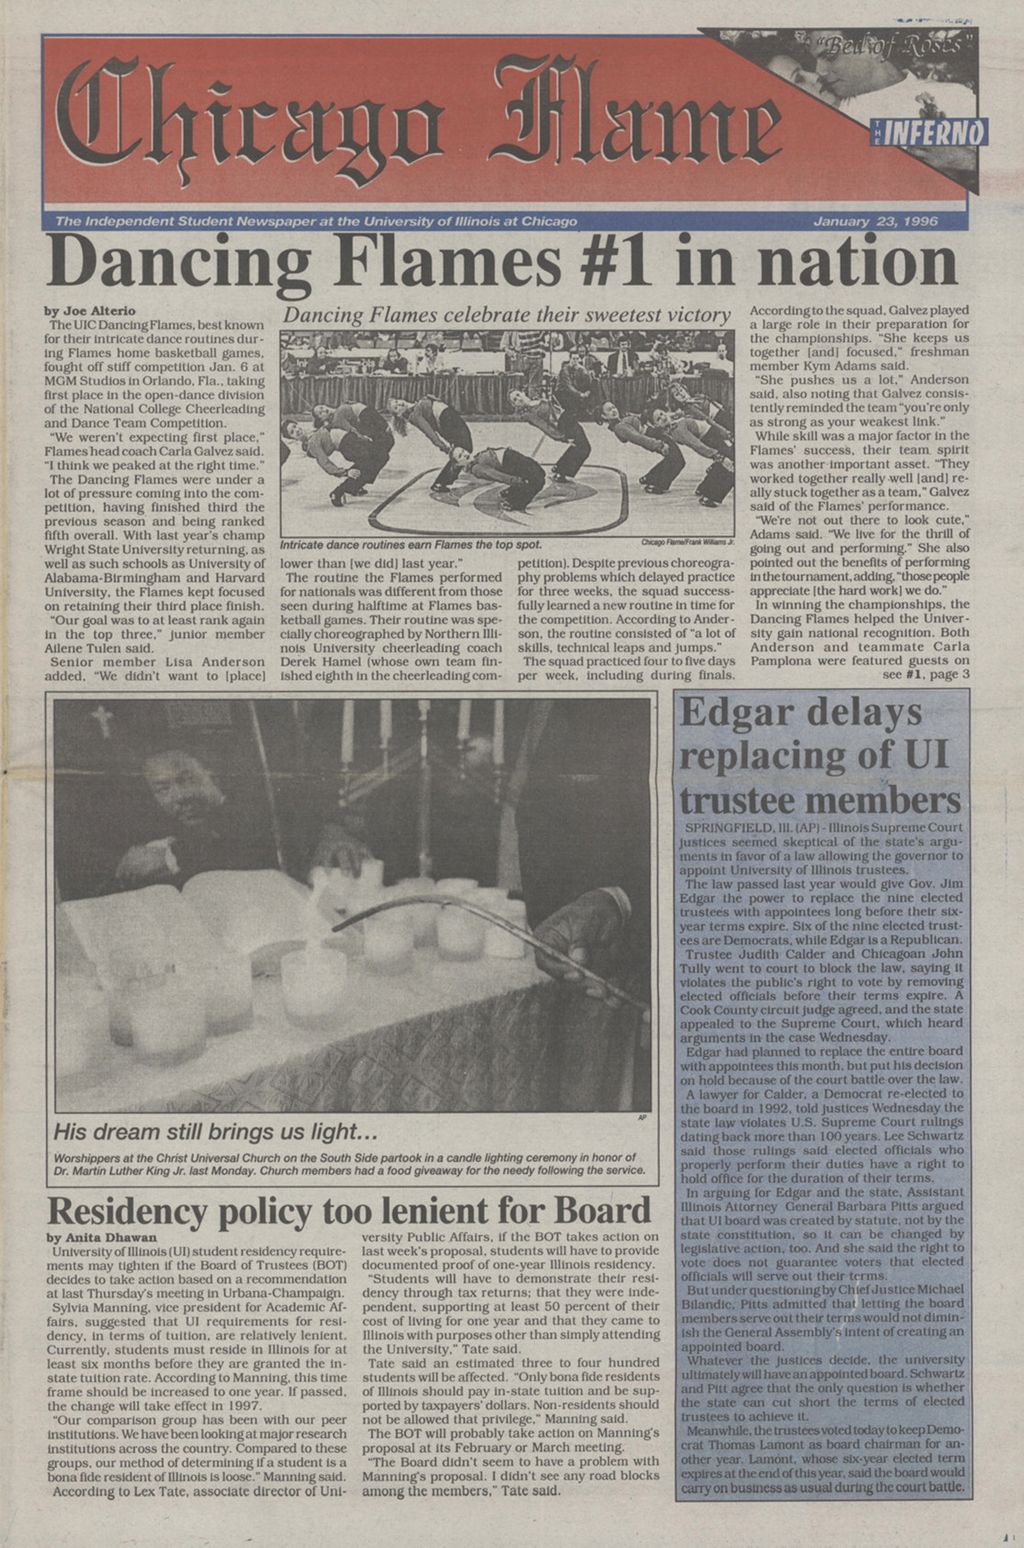 Chicago Flame (January 23, 1996)